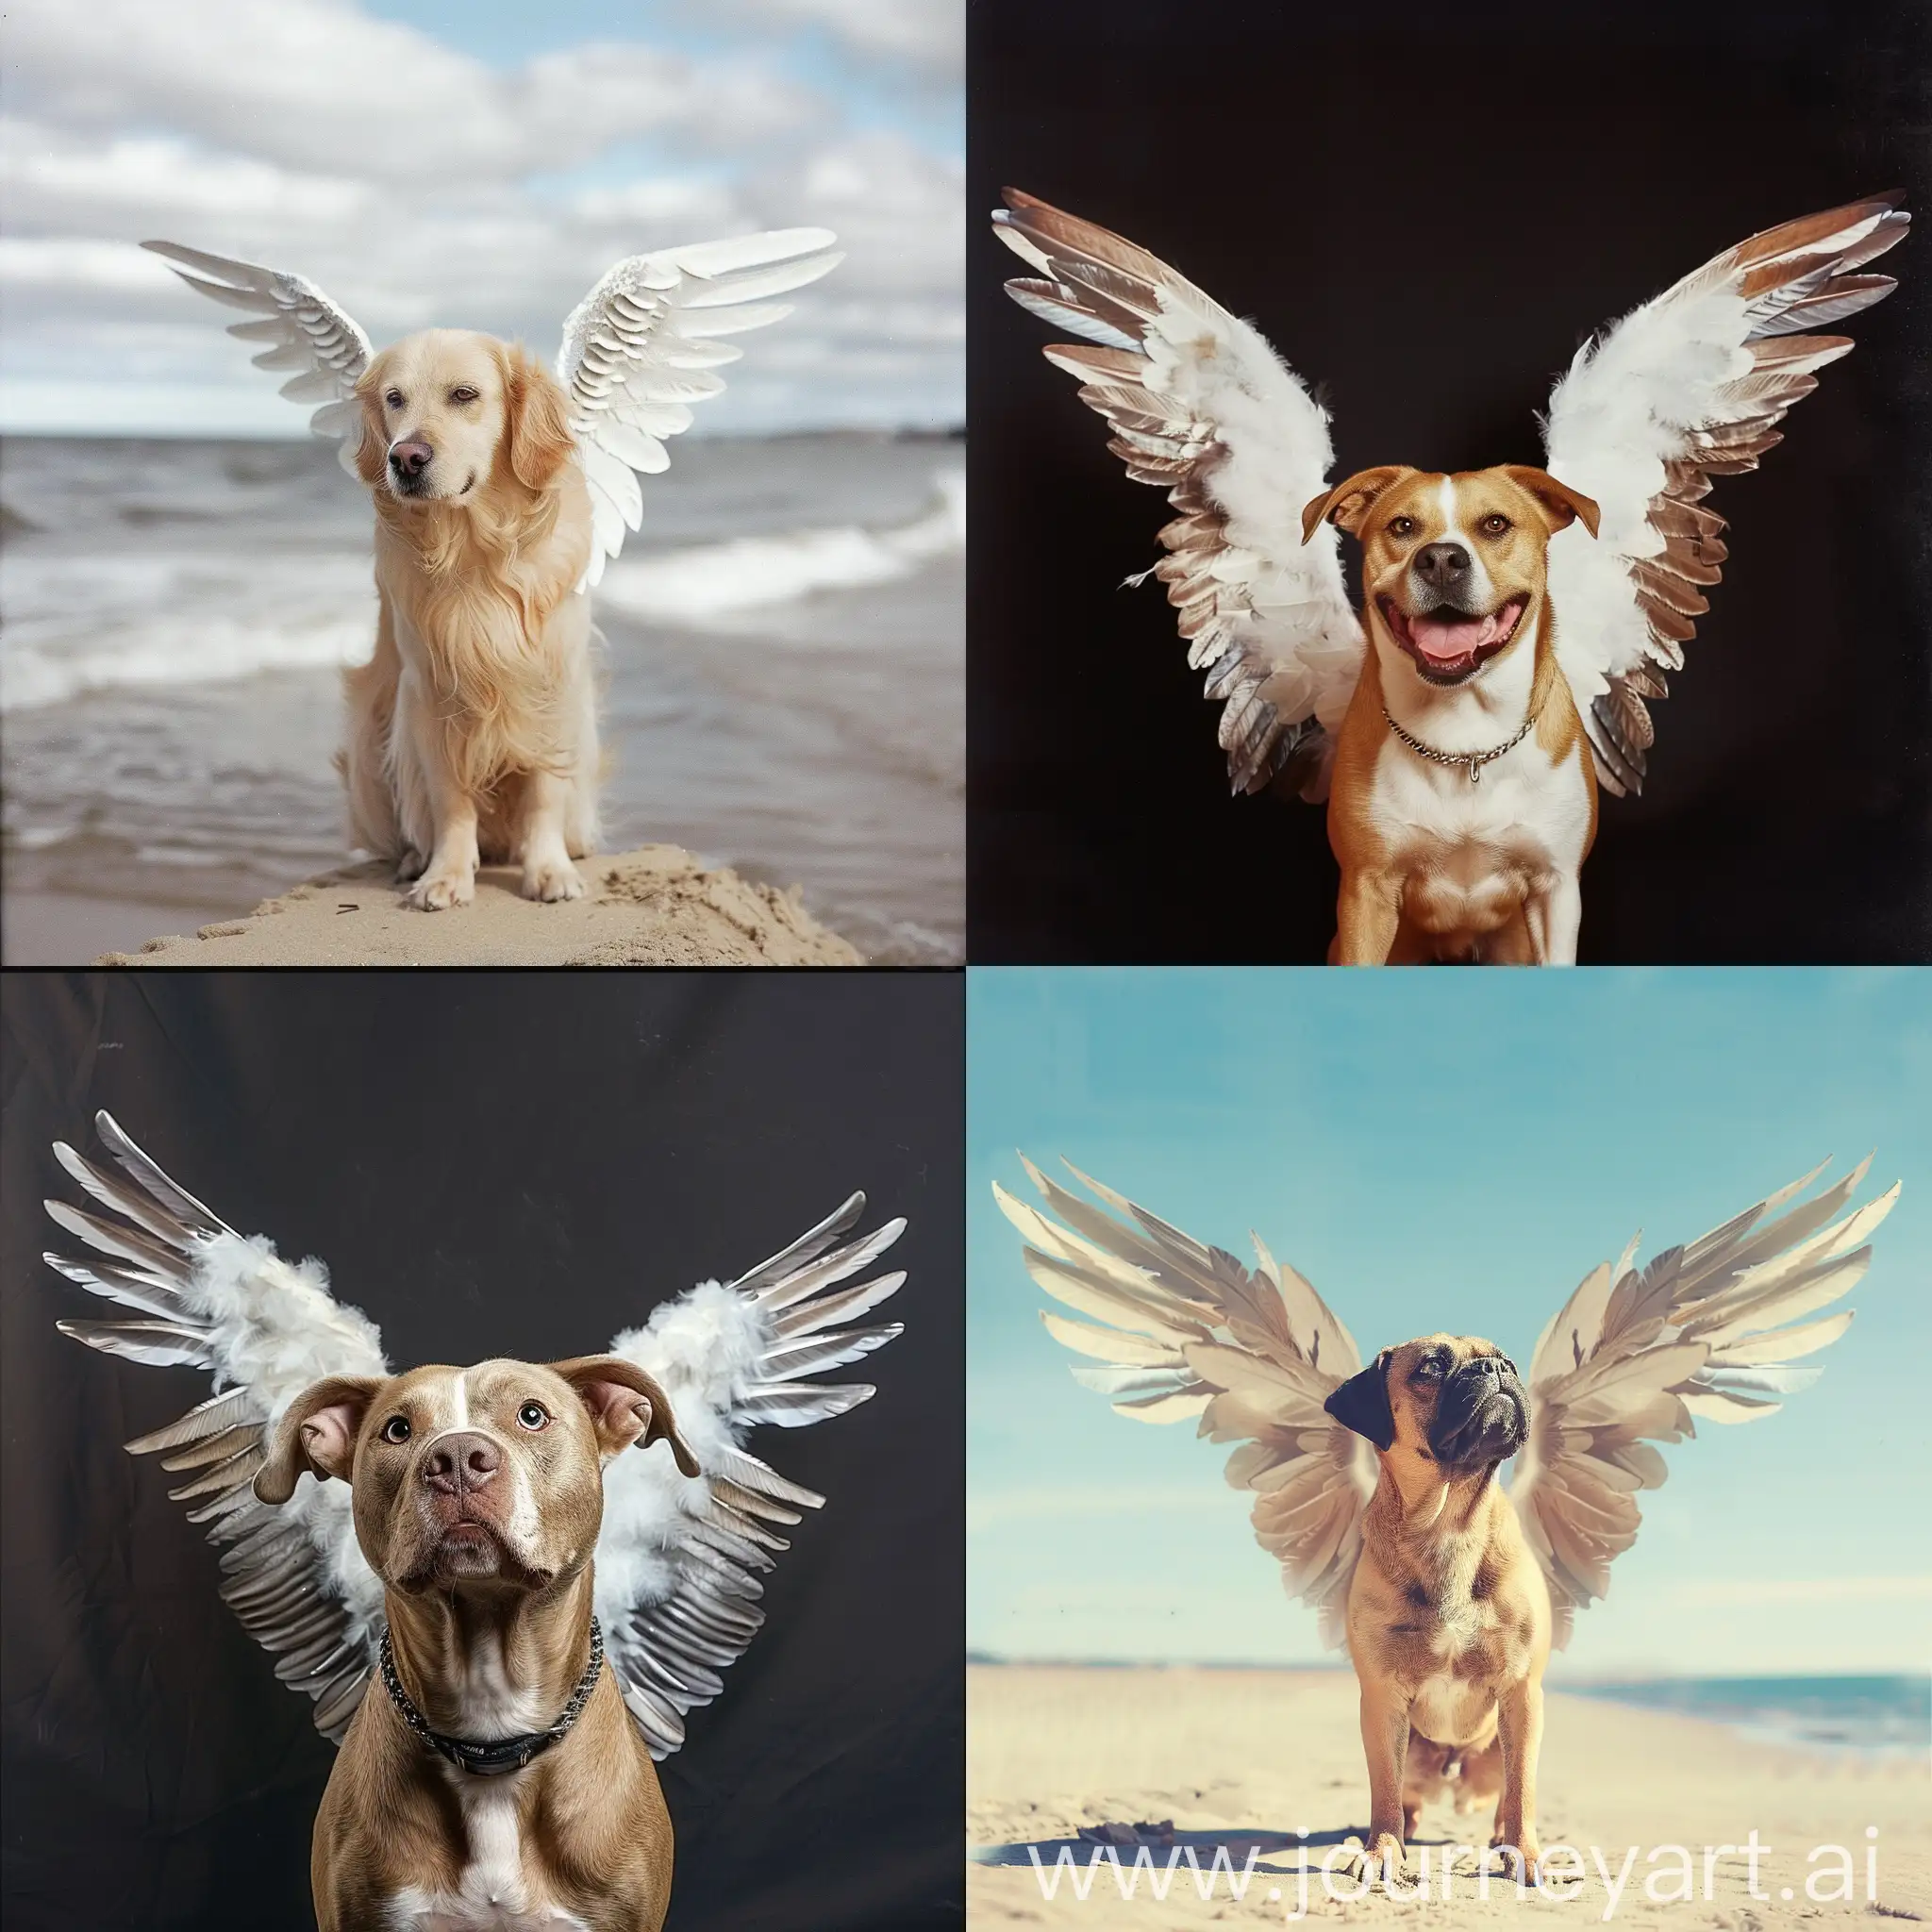 dog with wings
